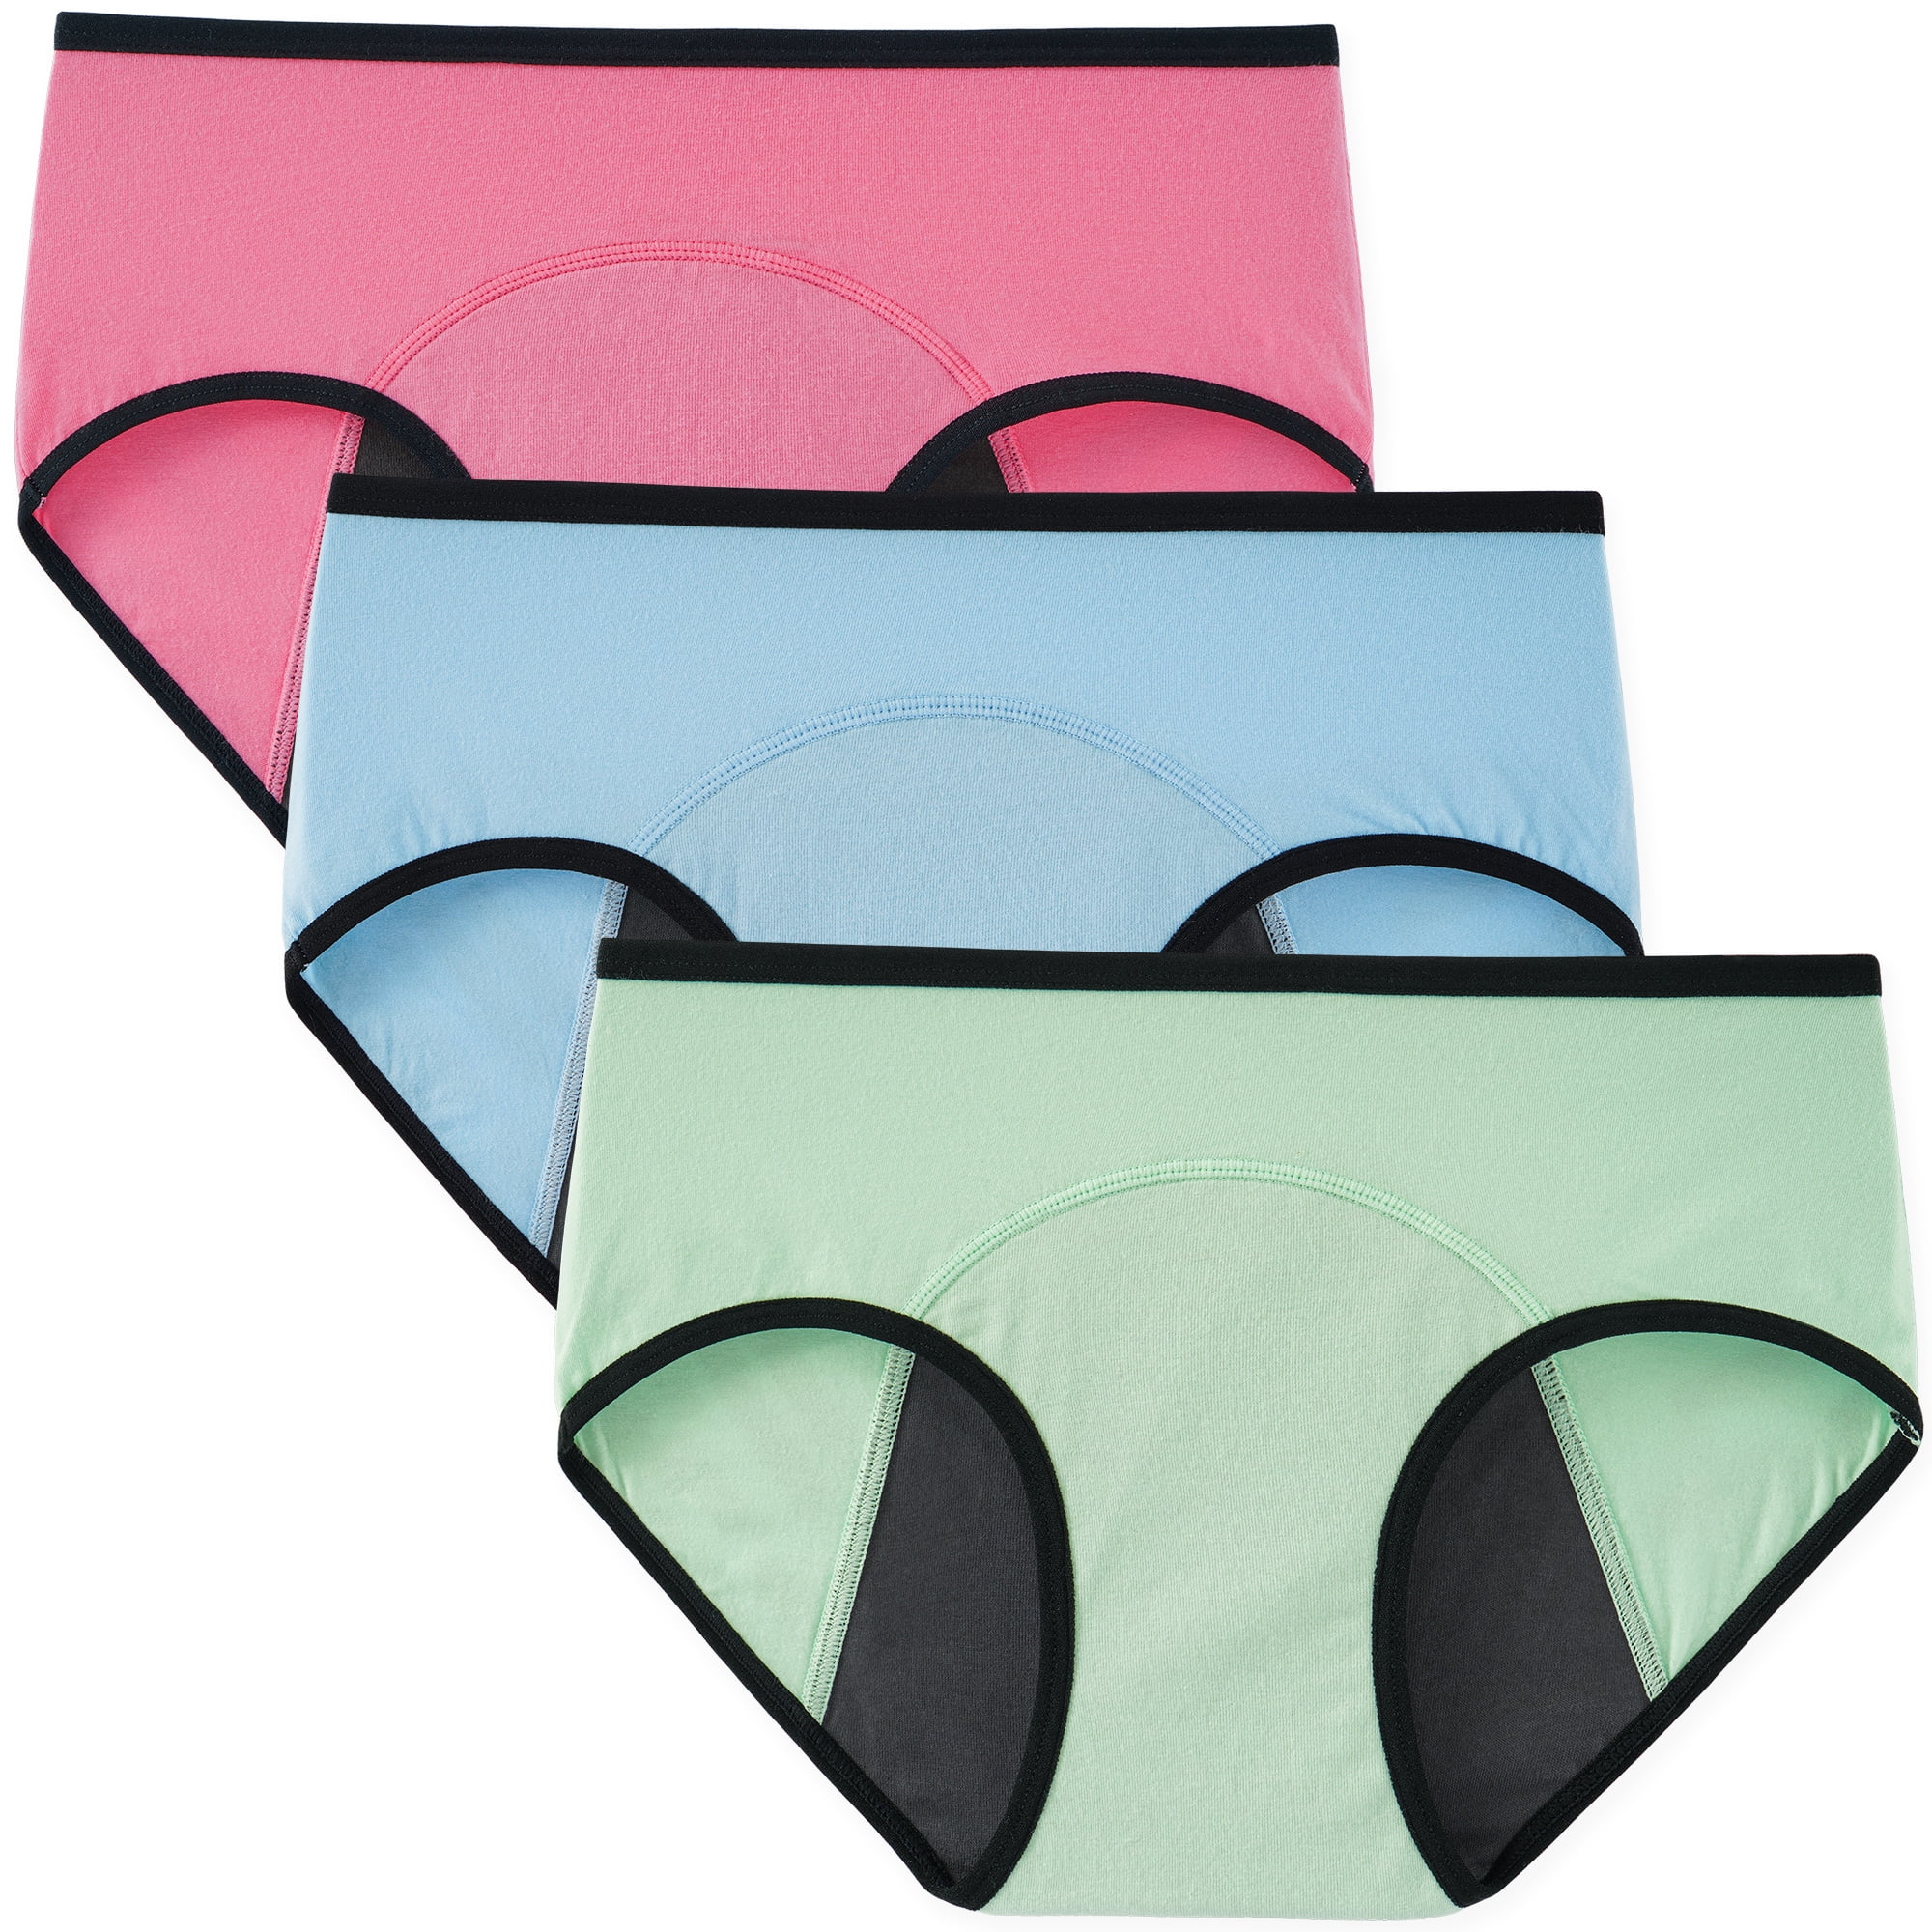 INNERSY Women's Period Panties Cotton Hipster Menstrual Maternity Underwear  3-Pack (M, Pink/Blue/Green with Dark Lining) 